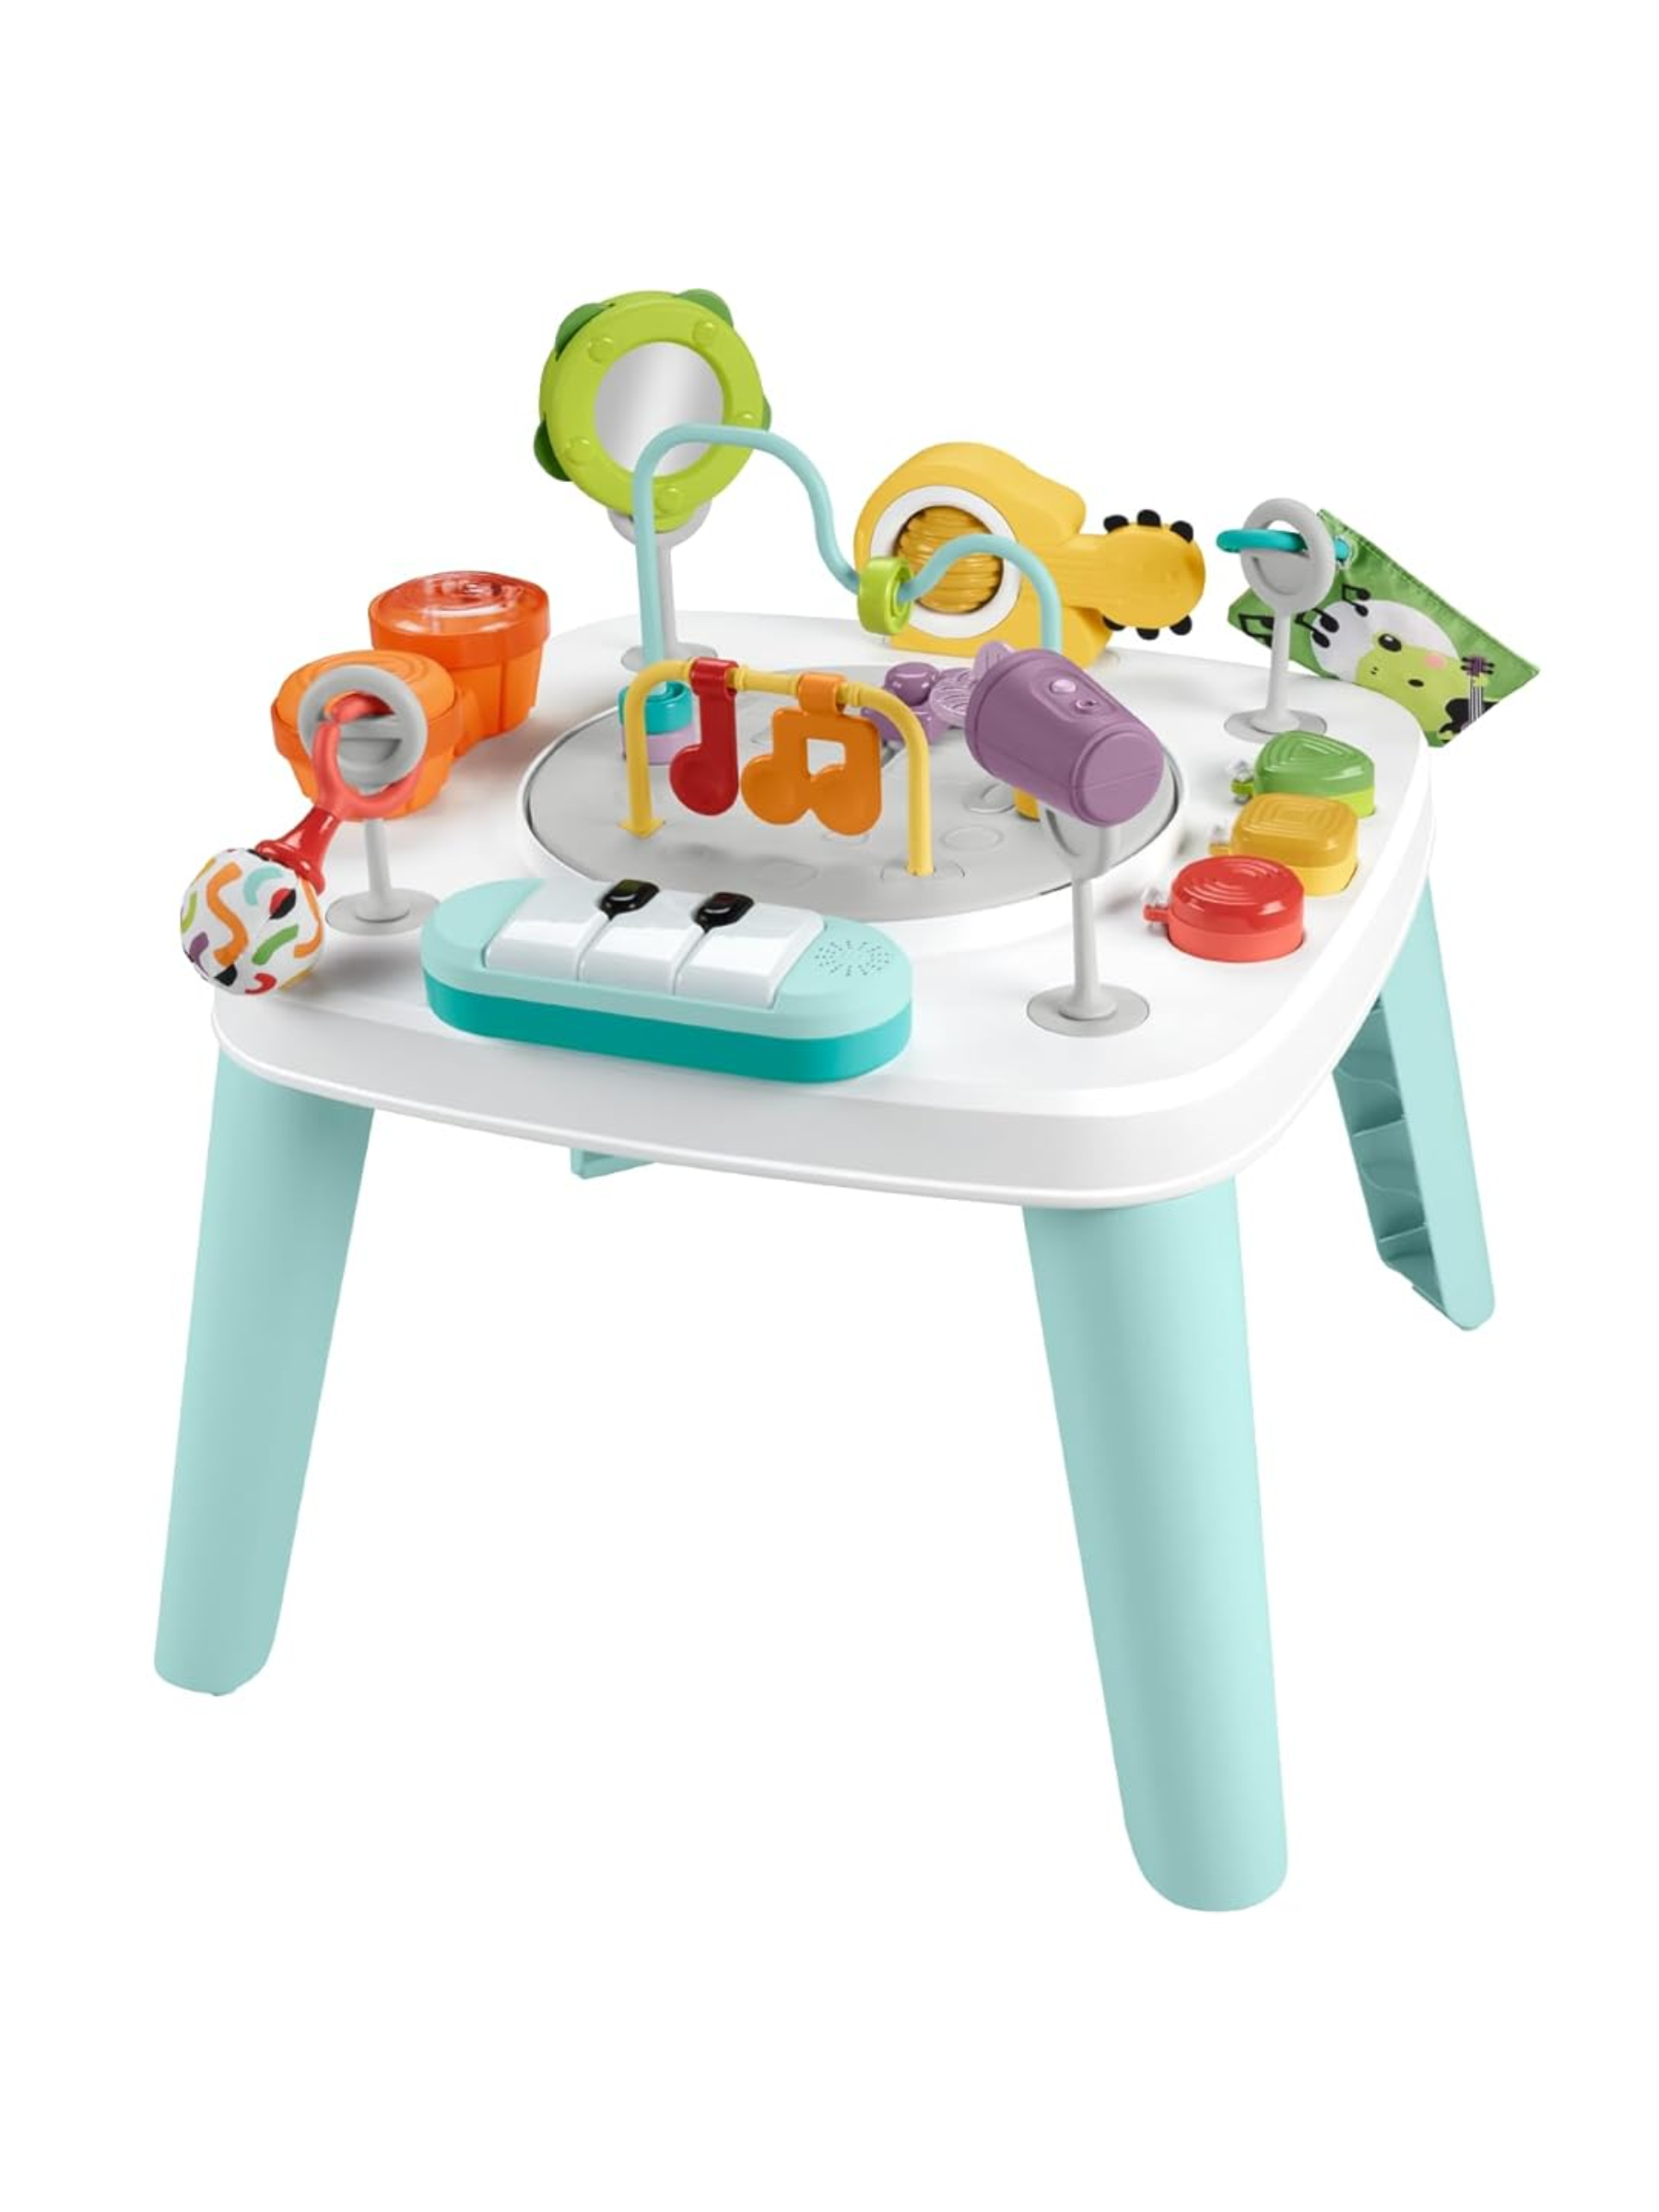 <p>From the minds behind "Purple Monkey in a Bubblegum Tree" (IYKYK) comes this music-themed activity center and toddler play table. It supports baby as they learn to stand, then grows with them as they become more confident on their feet.</p> <p><strong>What our expert says:</strong> My kiddos are younger than 1, but I love that they'll be able to grow with this toy as they age. Plus, the piano is removable for an easy way to keep the little one entertained during car trips. <em>-AM</em></p> $100, Amazon. <a href="https://www.amazon.com/Fisher-Price-Toddler-Wonder-Activity-Developmental/dp/B0CBQVK95D">Get it now!</a><p>Sign up for today’s biggest stories, from pop culture to politics.</p><a href="https://www.glamour.com/newsletter/news?sourceCode=msnsend">Sign Up</a>